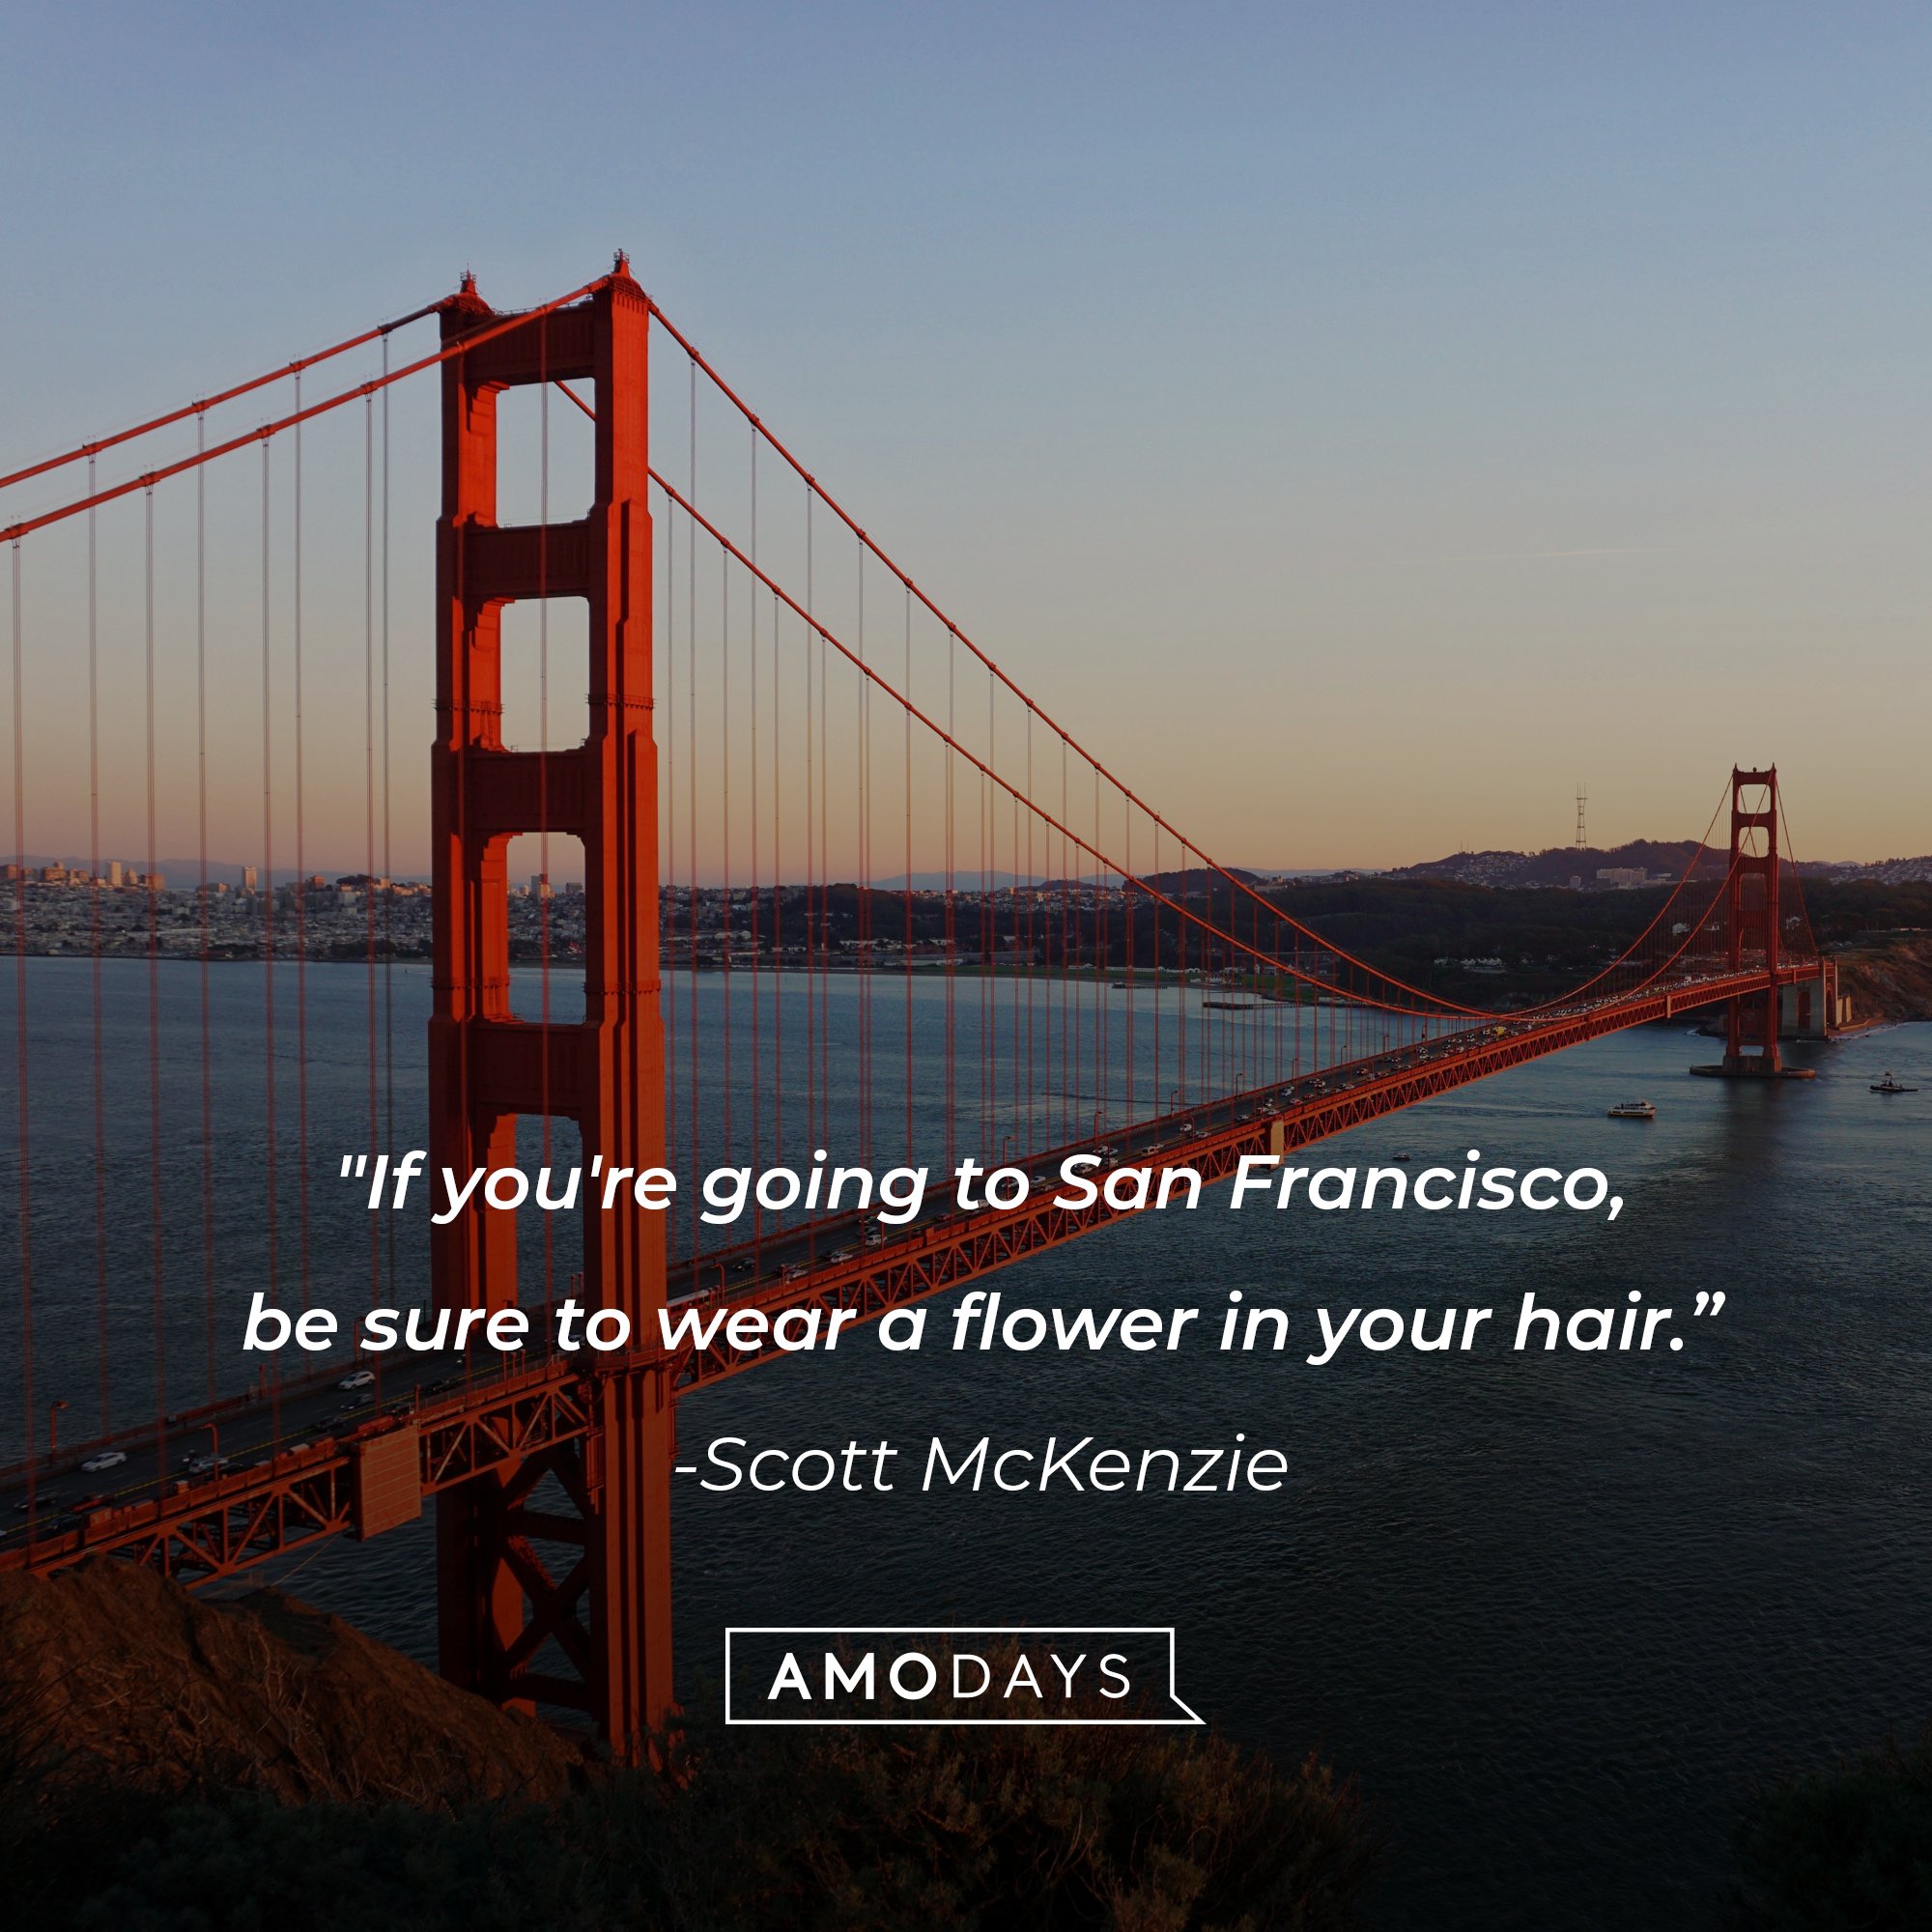 Scott McKenzie’s quote:  "If you're going to San Francisco, be sure to wear some flowers in your hair." | Image: AmoDays